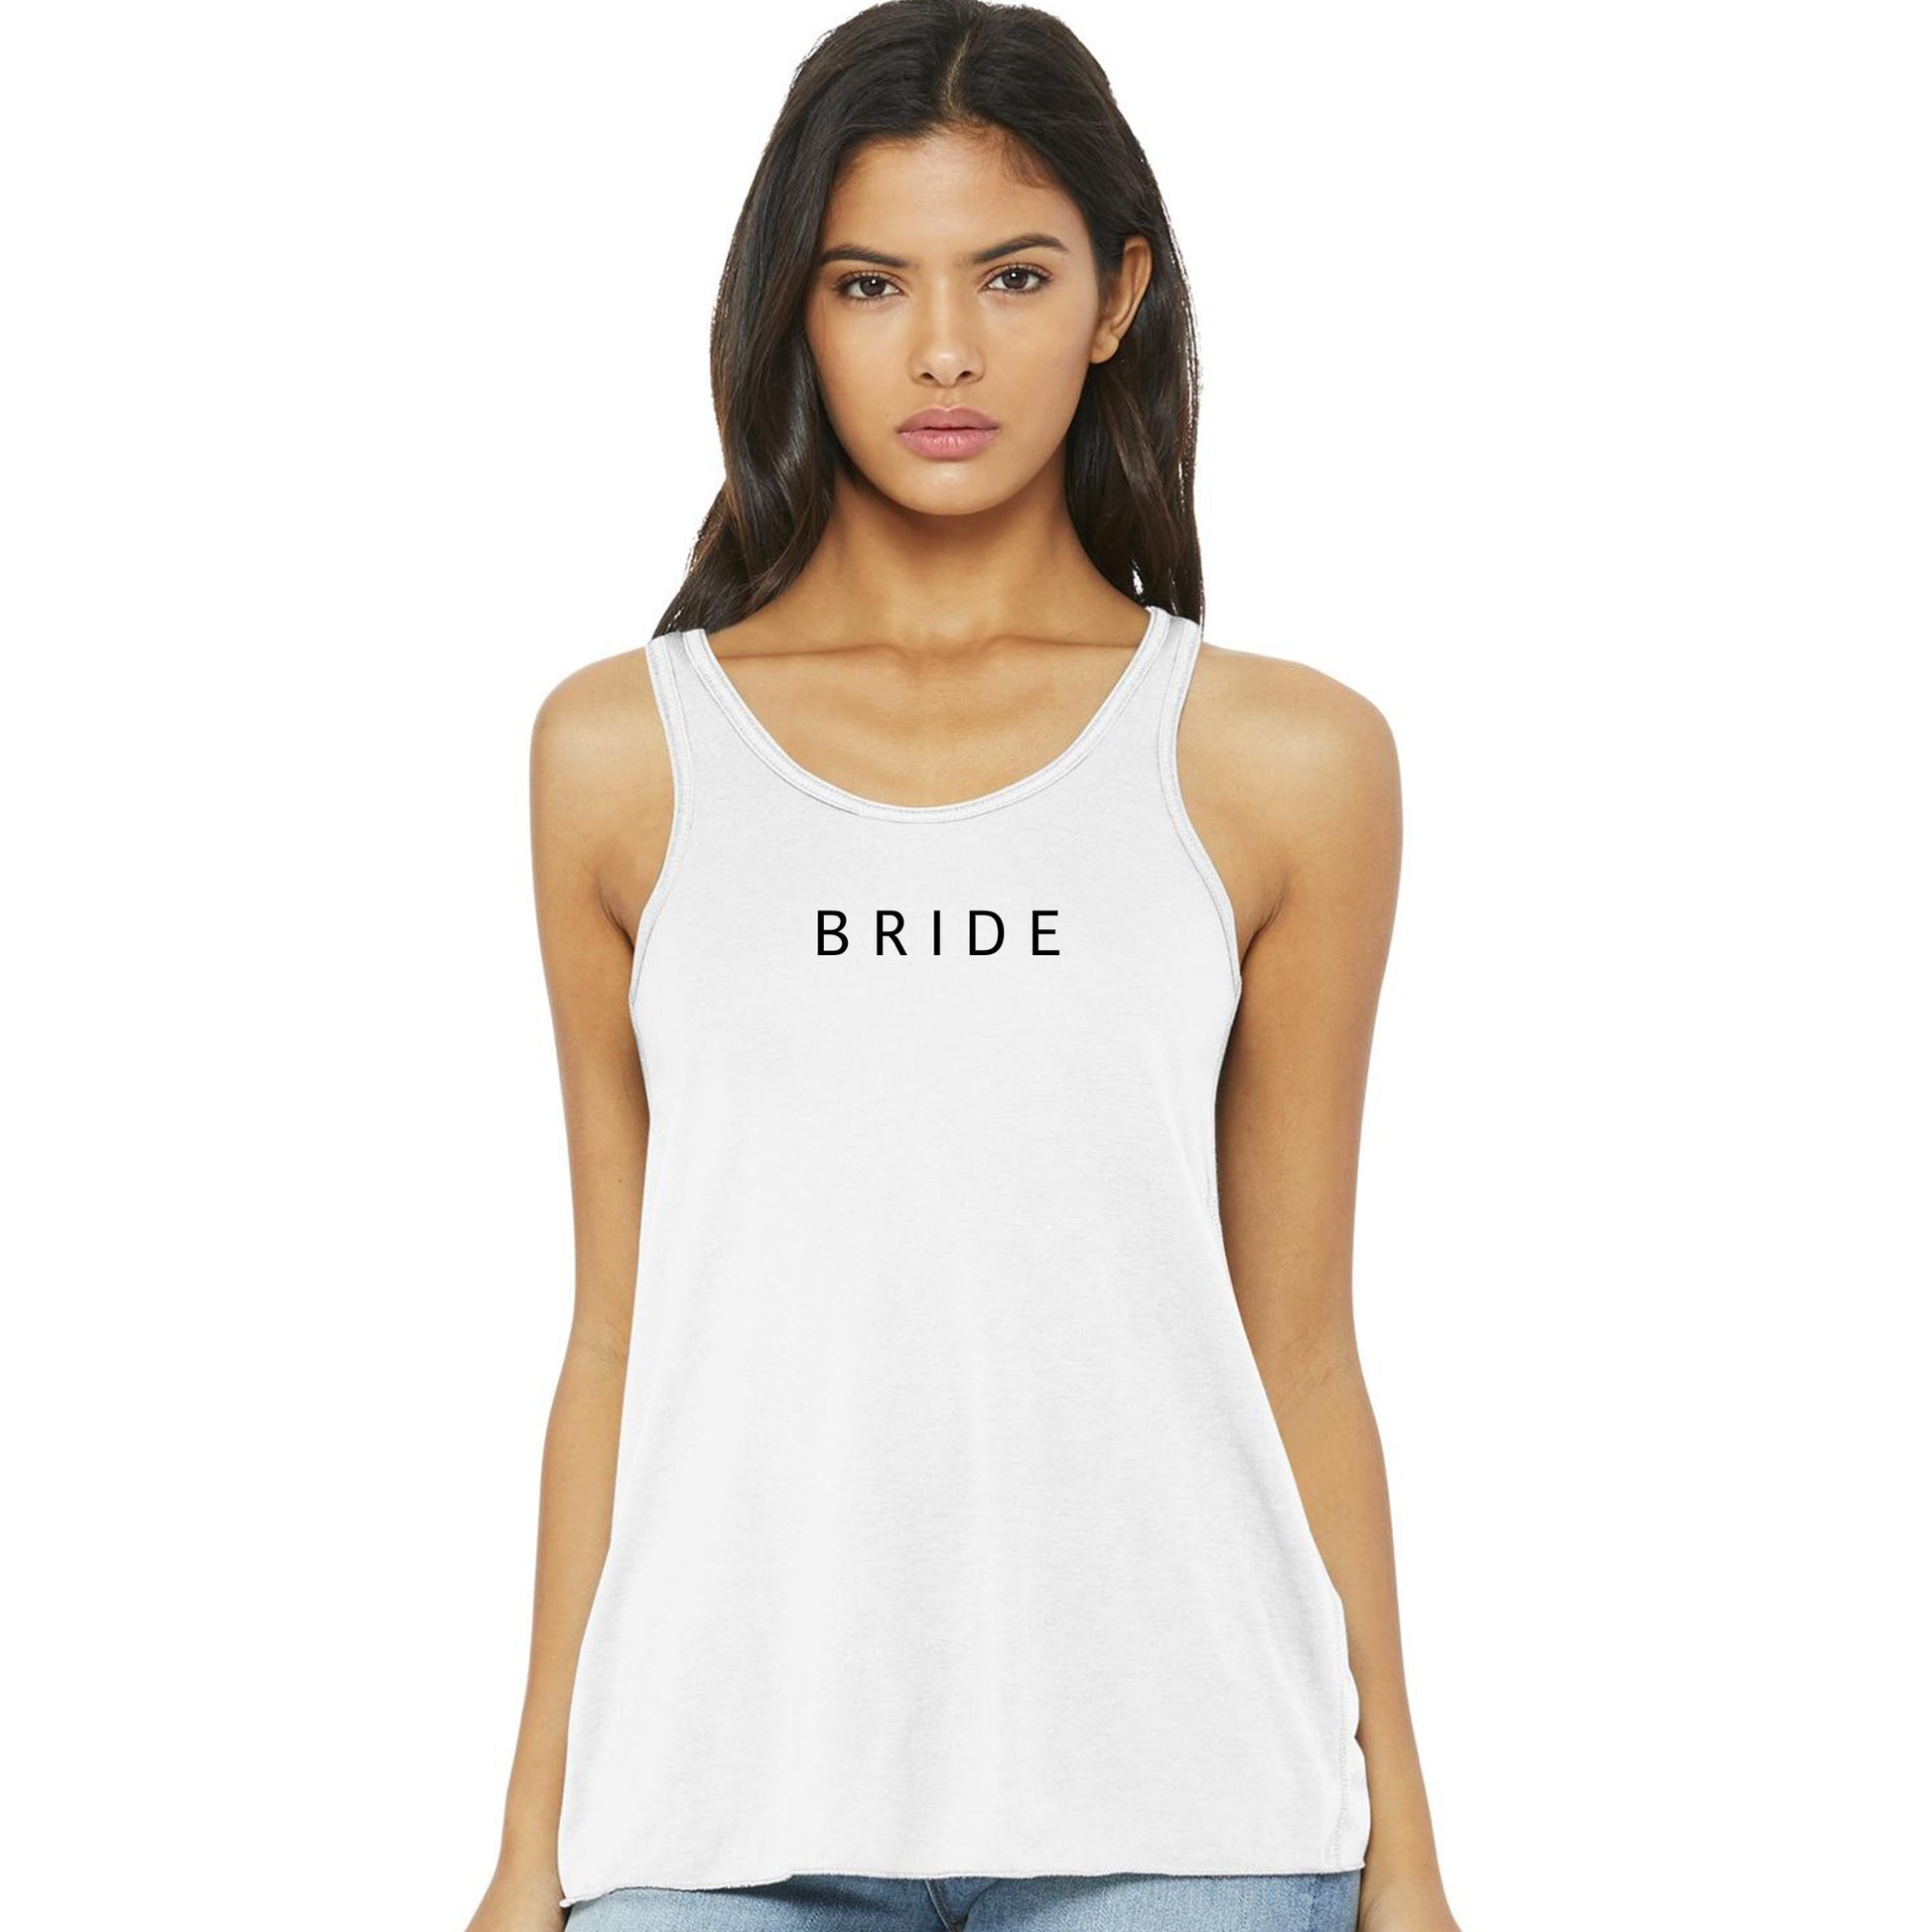 Bride Flowy Racerback Tank Top, Bridal Party Shirts, Wedding Party Shirts, Getting ready outfit - Amazing Faith Designs